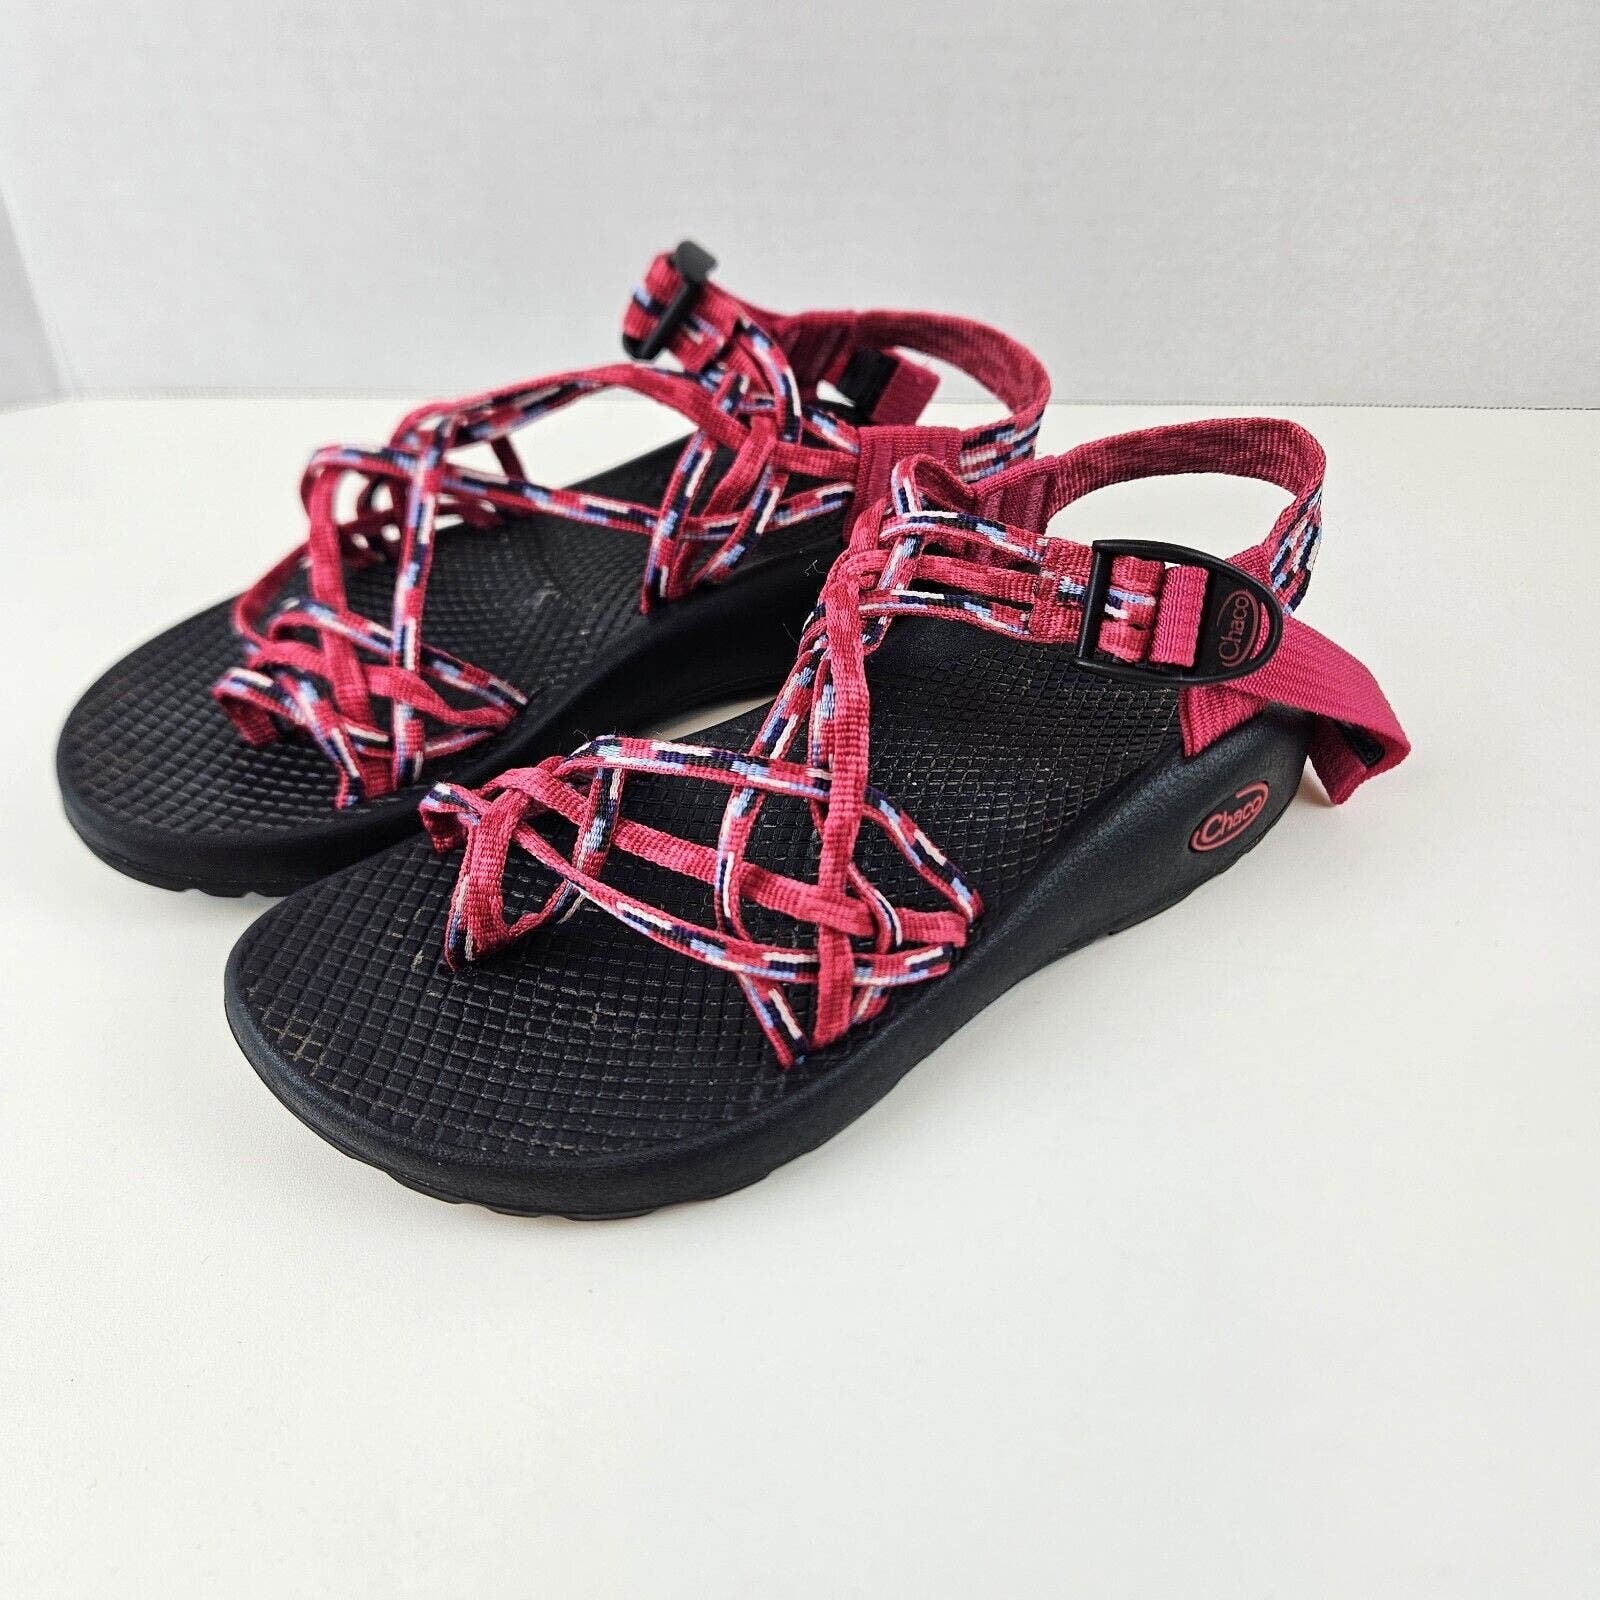 Chaco ZX2 Classic Sandal Pink Women’s Size 7 Strappy Sport kQOgoRgyv